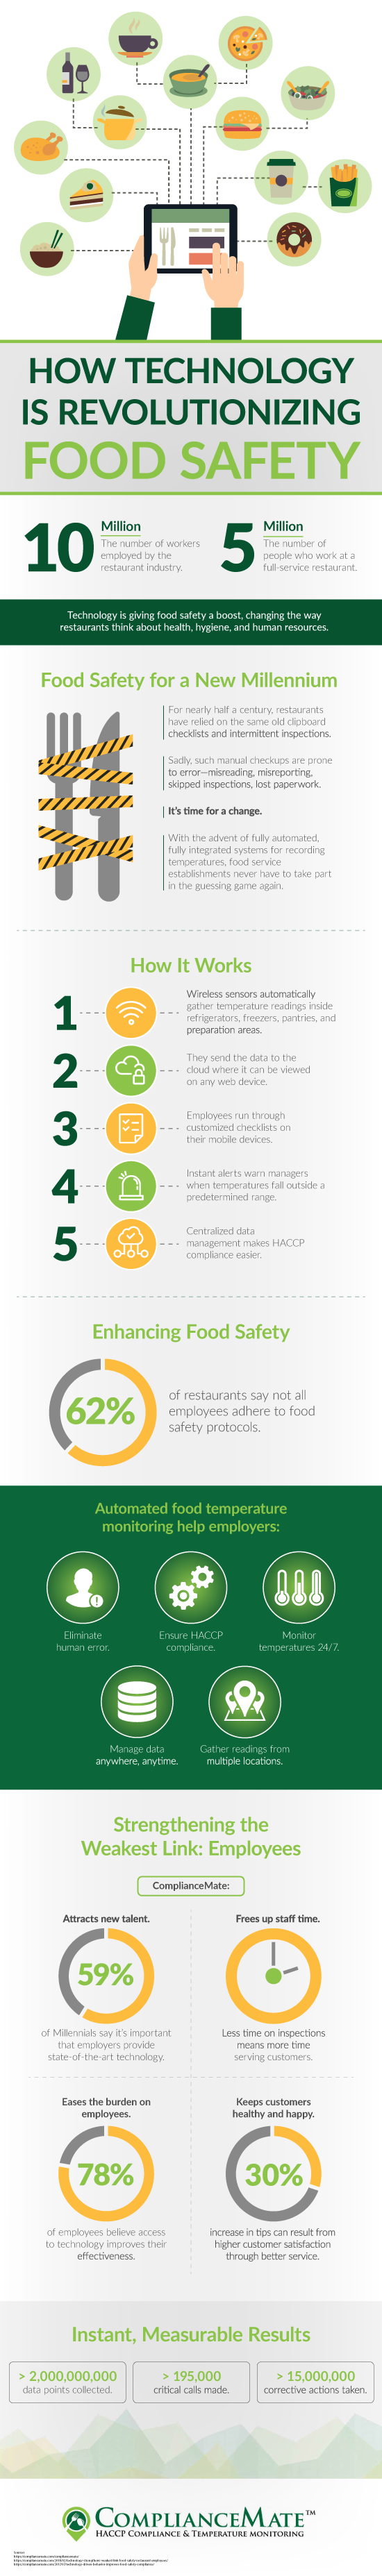 Infographic - How Technology is Revolutionizing Food Safety